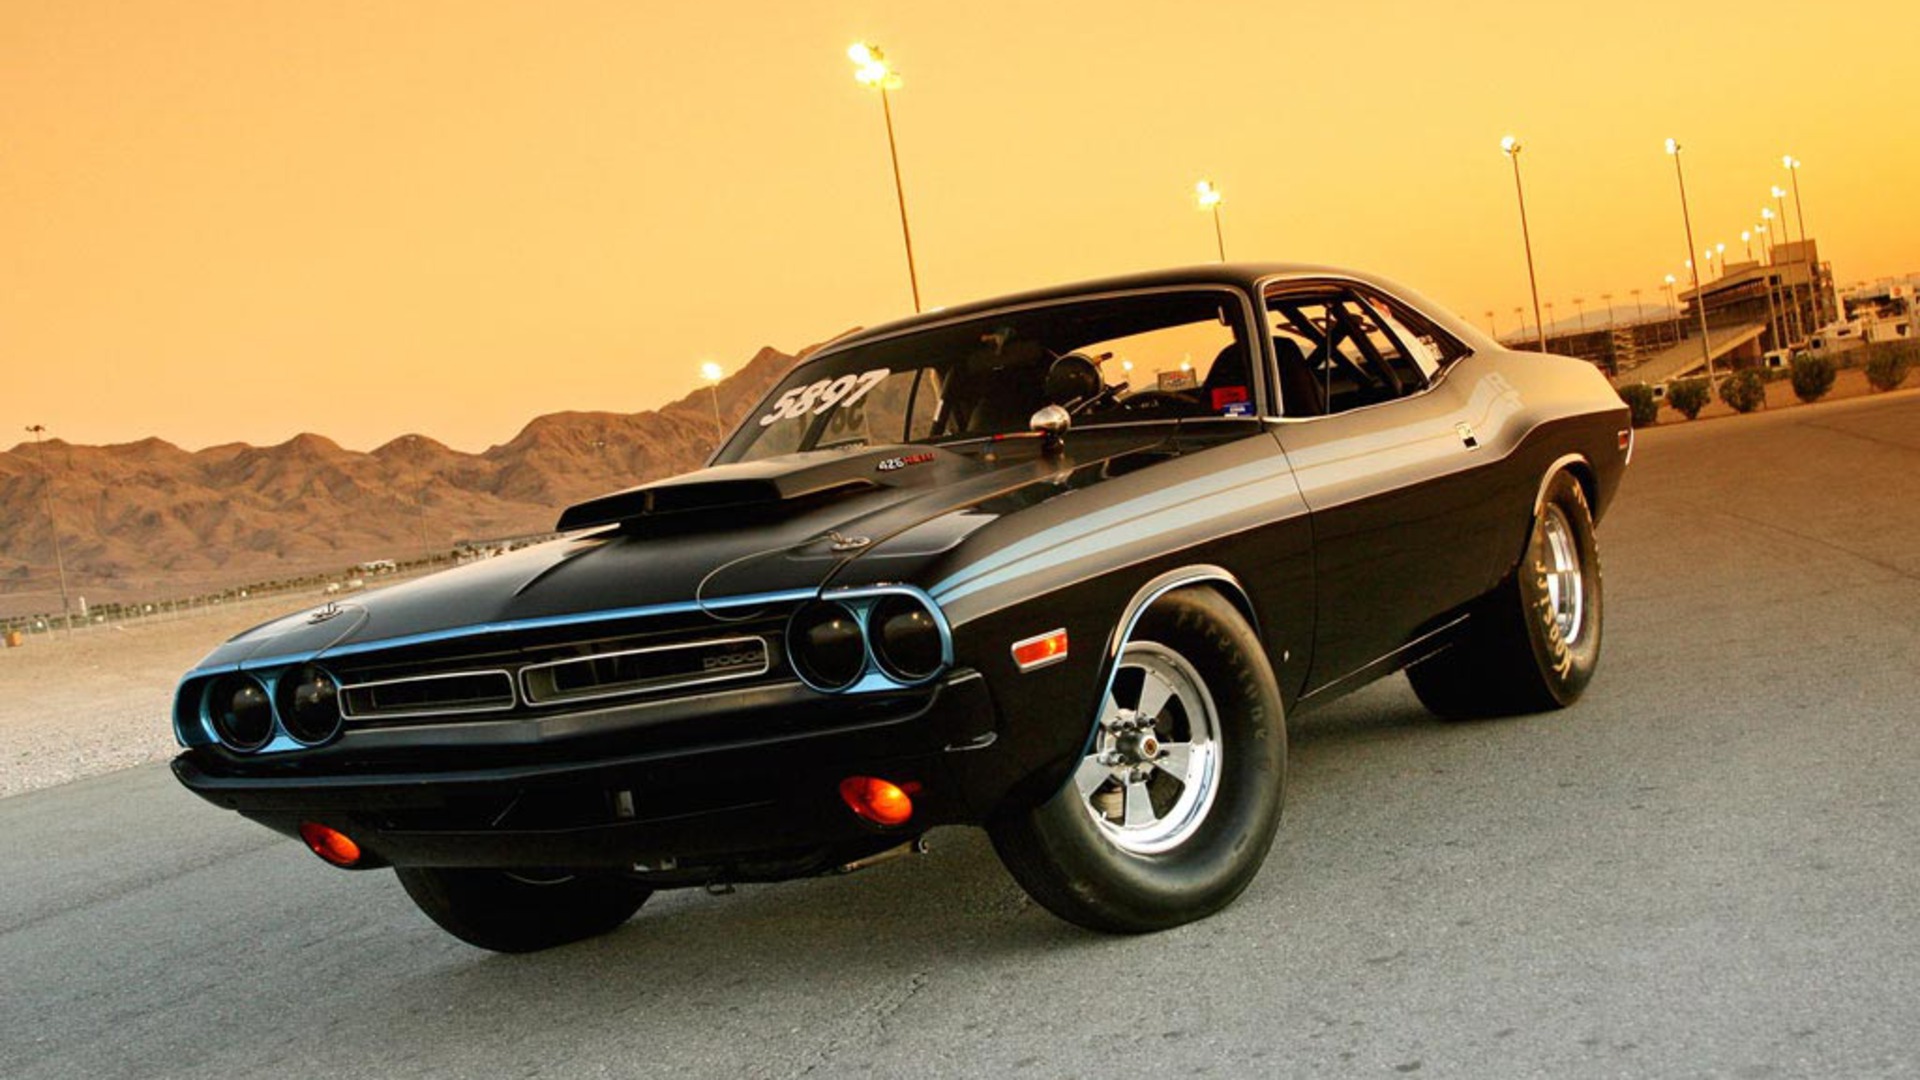 Black Muscle Car Wallpapers